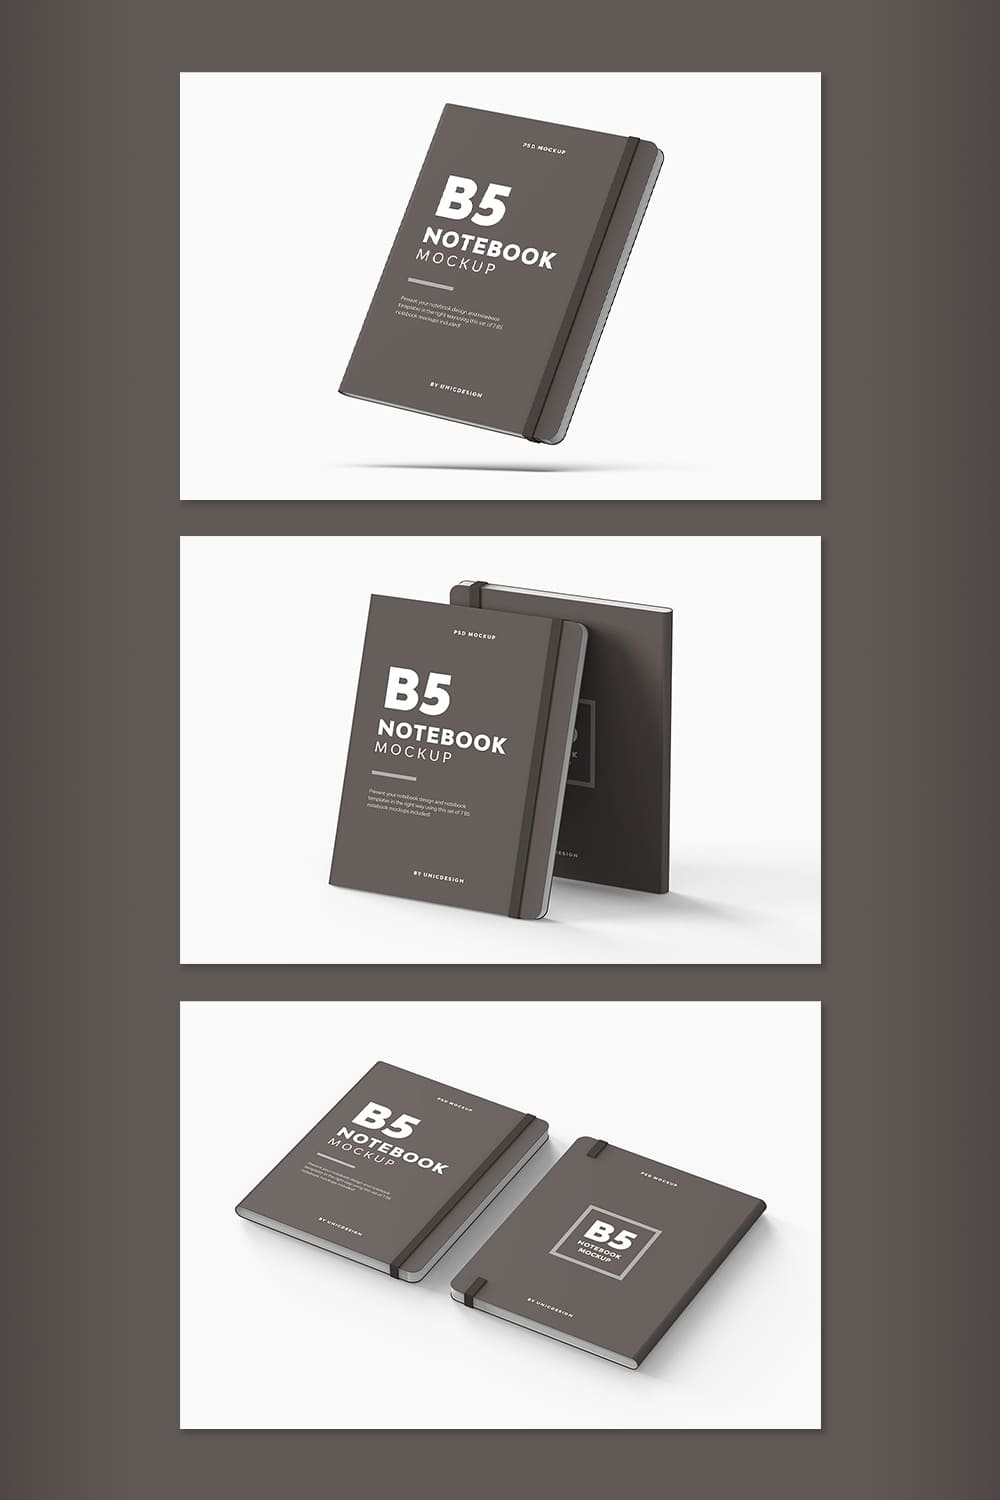 A pack of images of B5 notebook with an enchanting design.